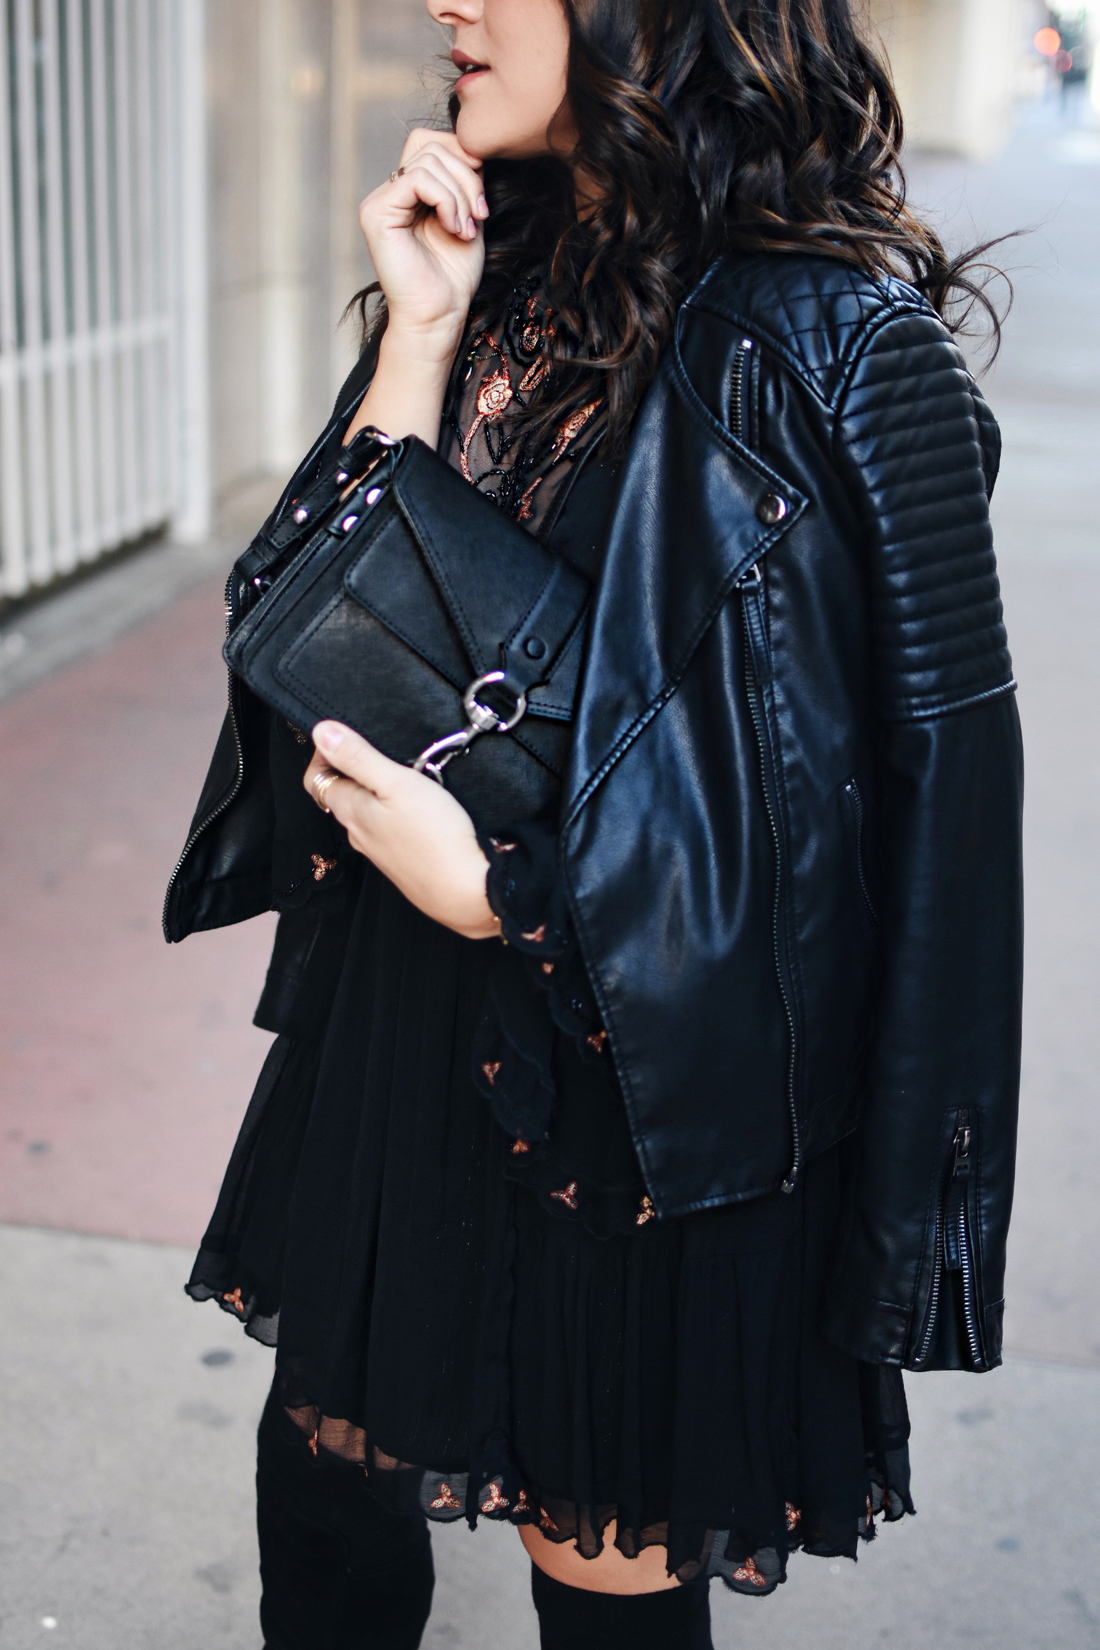 Carolina Hellal of Chic Talk wearing a Free People dress, Rebecca Minkoff crossbody bag and Vince Camuto over the knee black boots